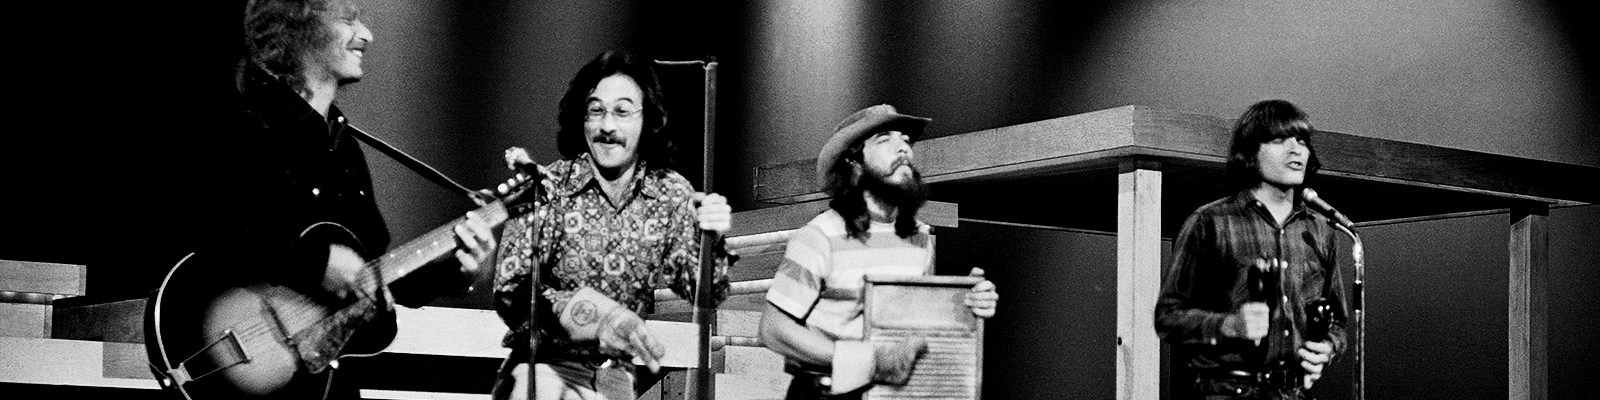 The Best Creedence Clearwater Revival Songs, Ranked